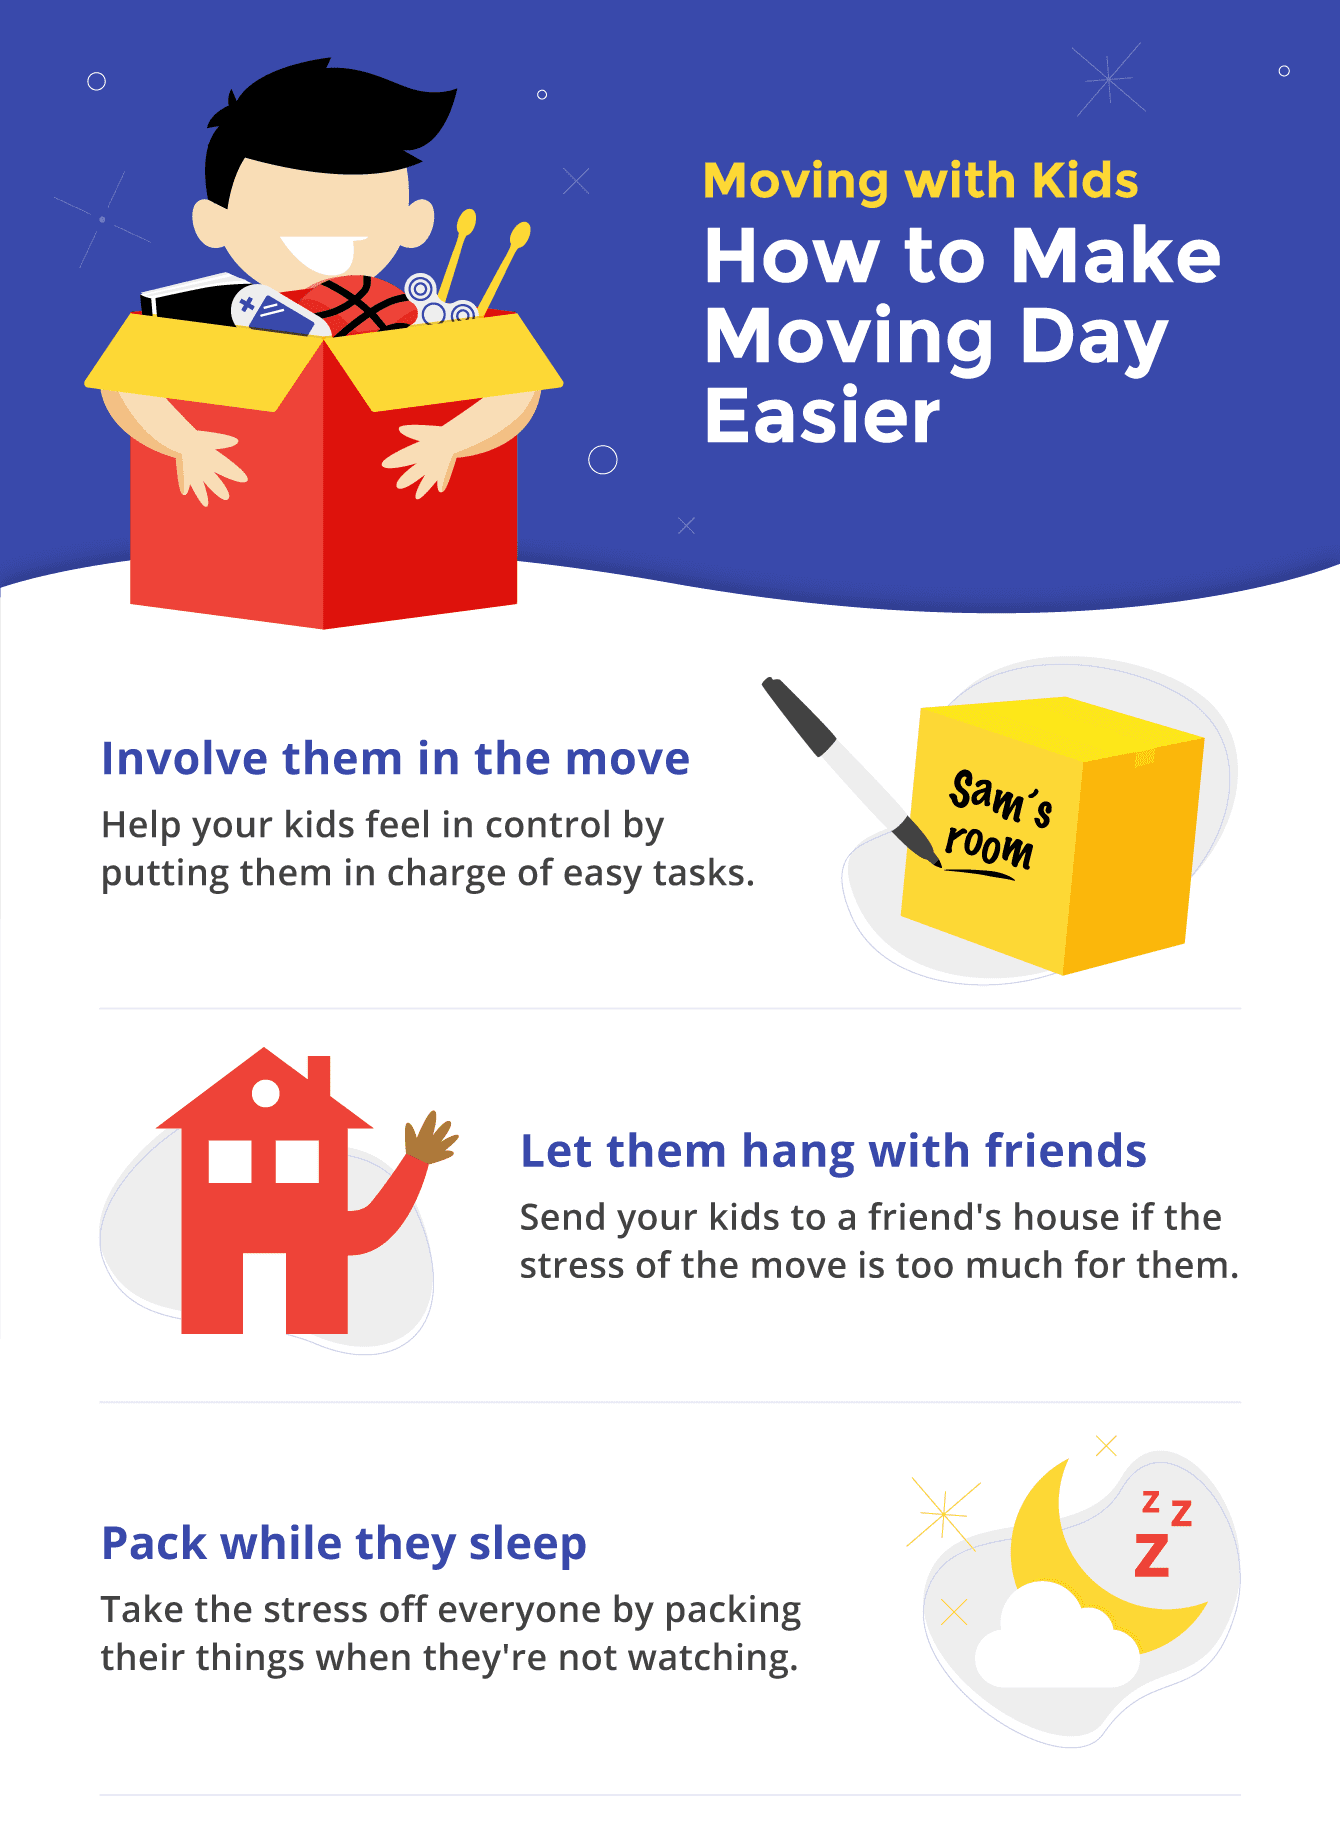 How to keep your kids calm and focused during your move.